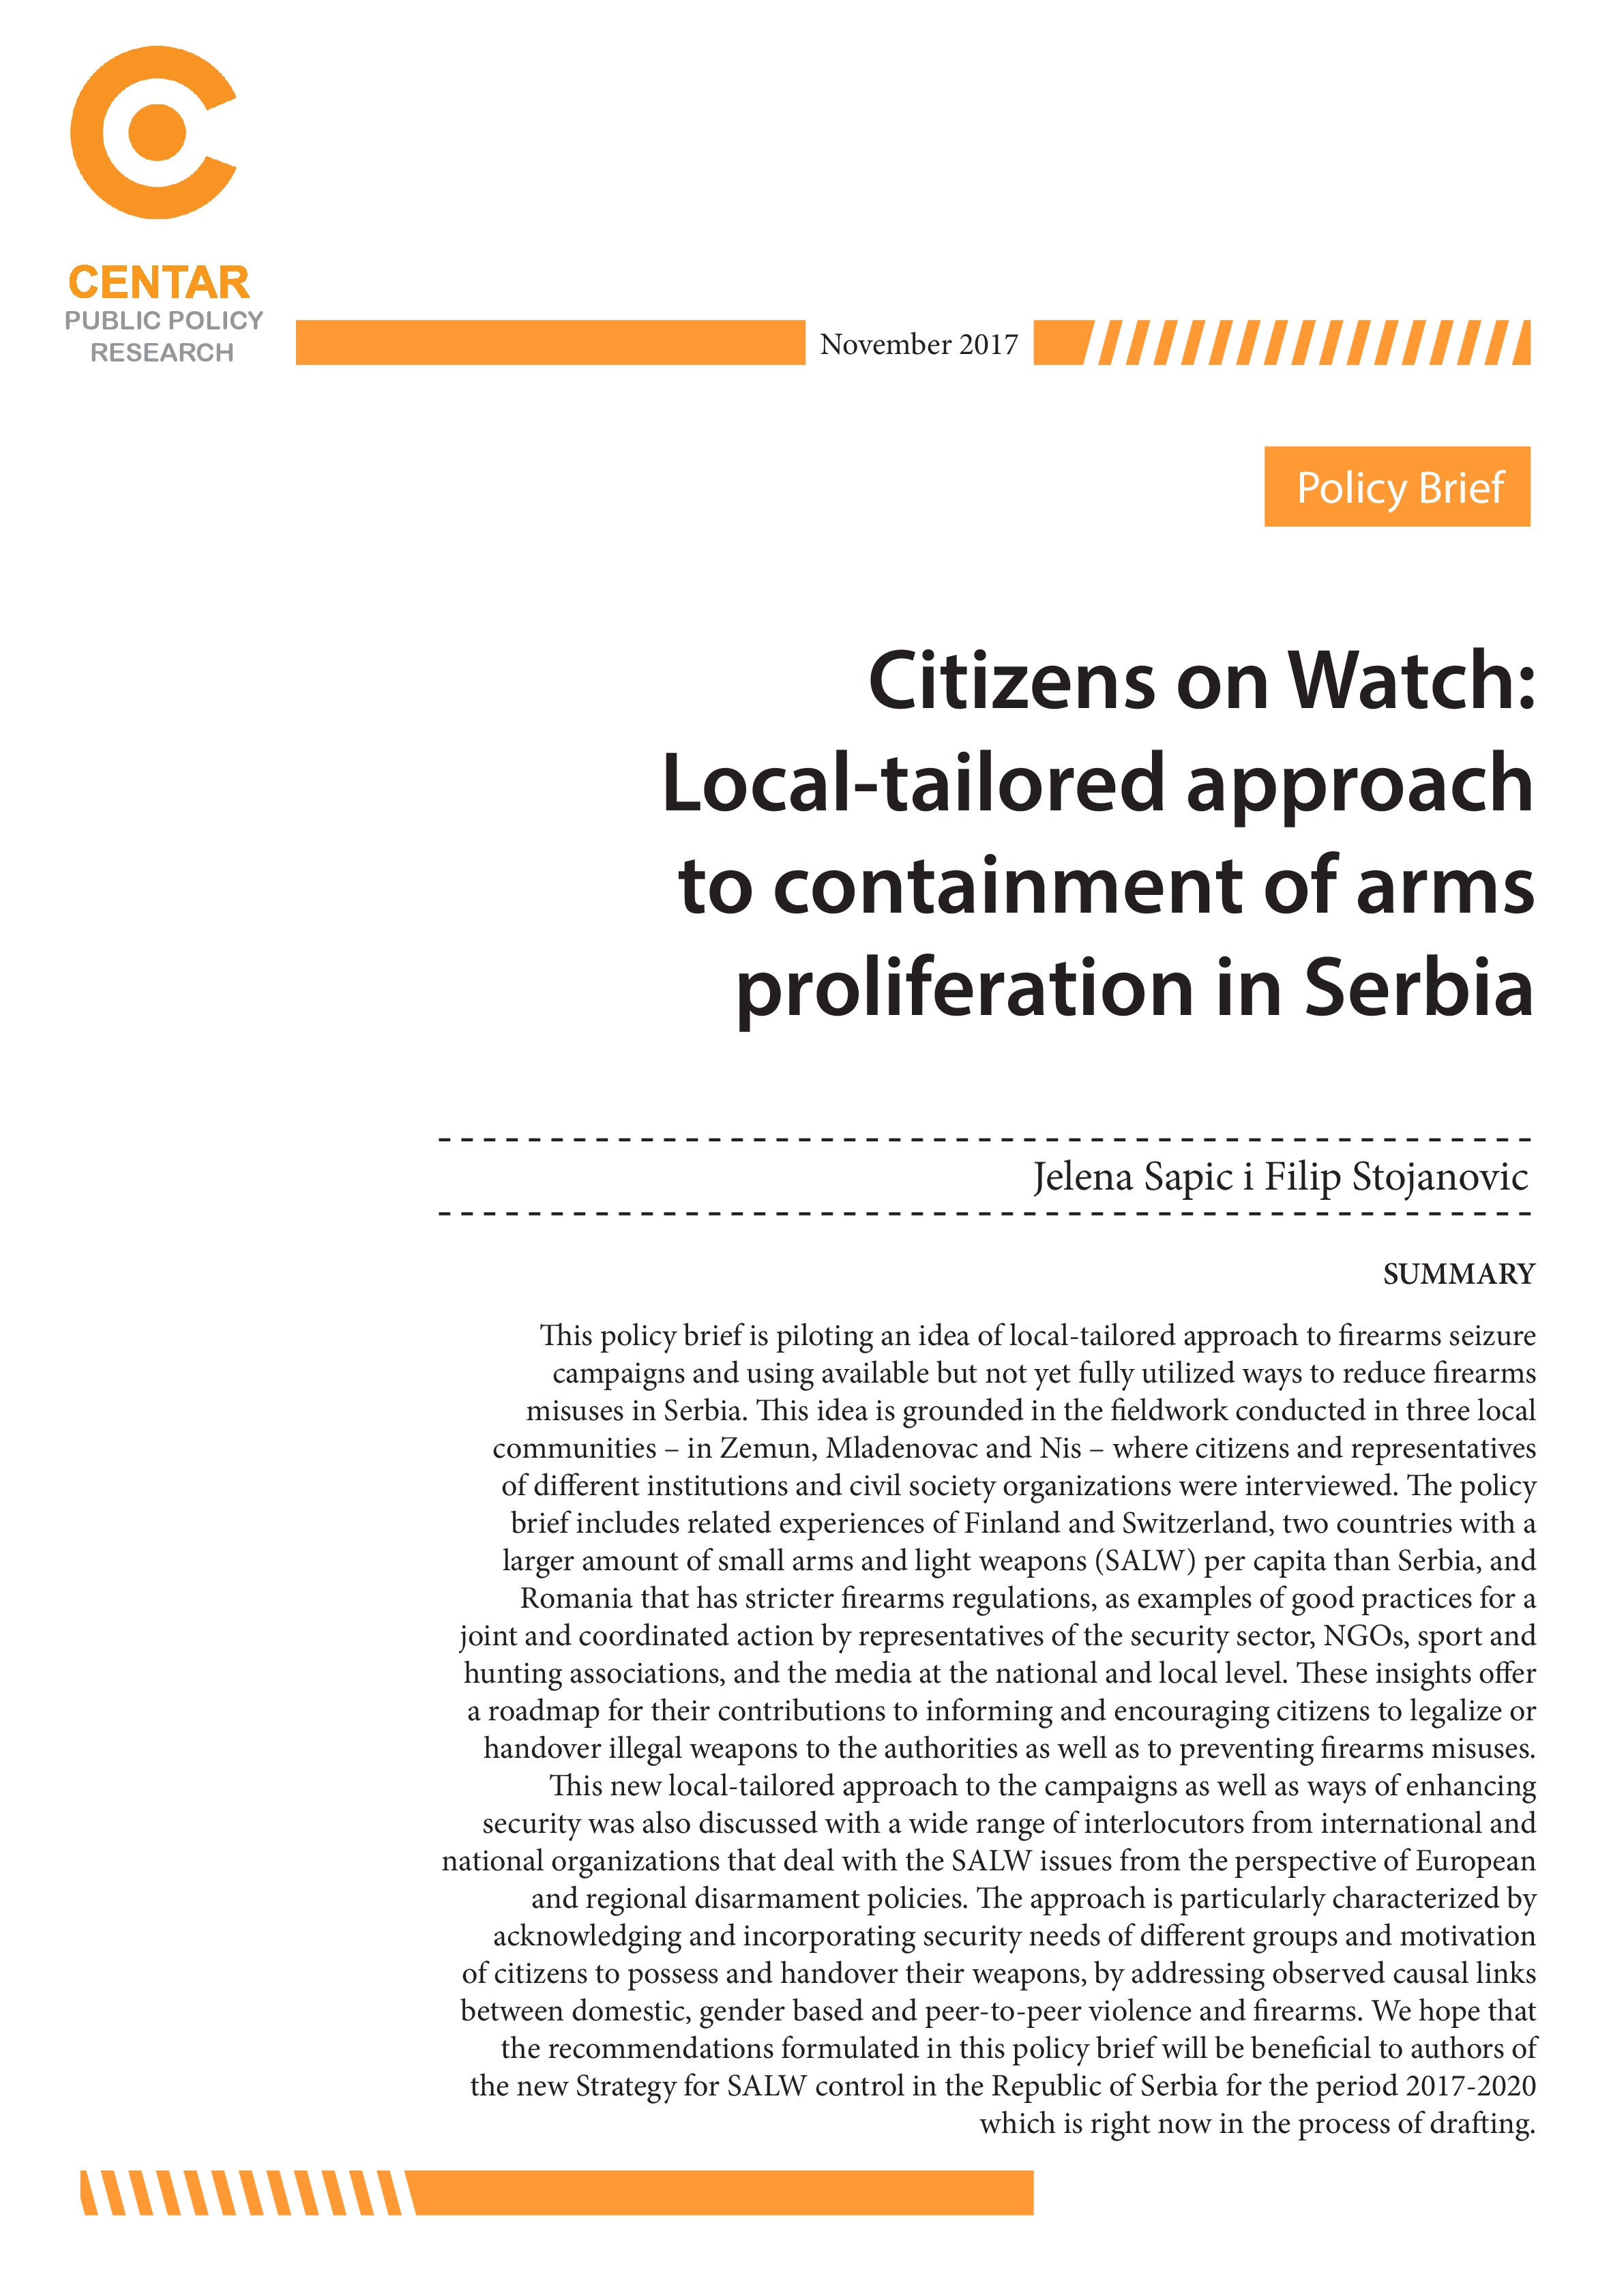 Citizens on Watch: Local tailored approach to containment of arms proliferation in Serbia